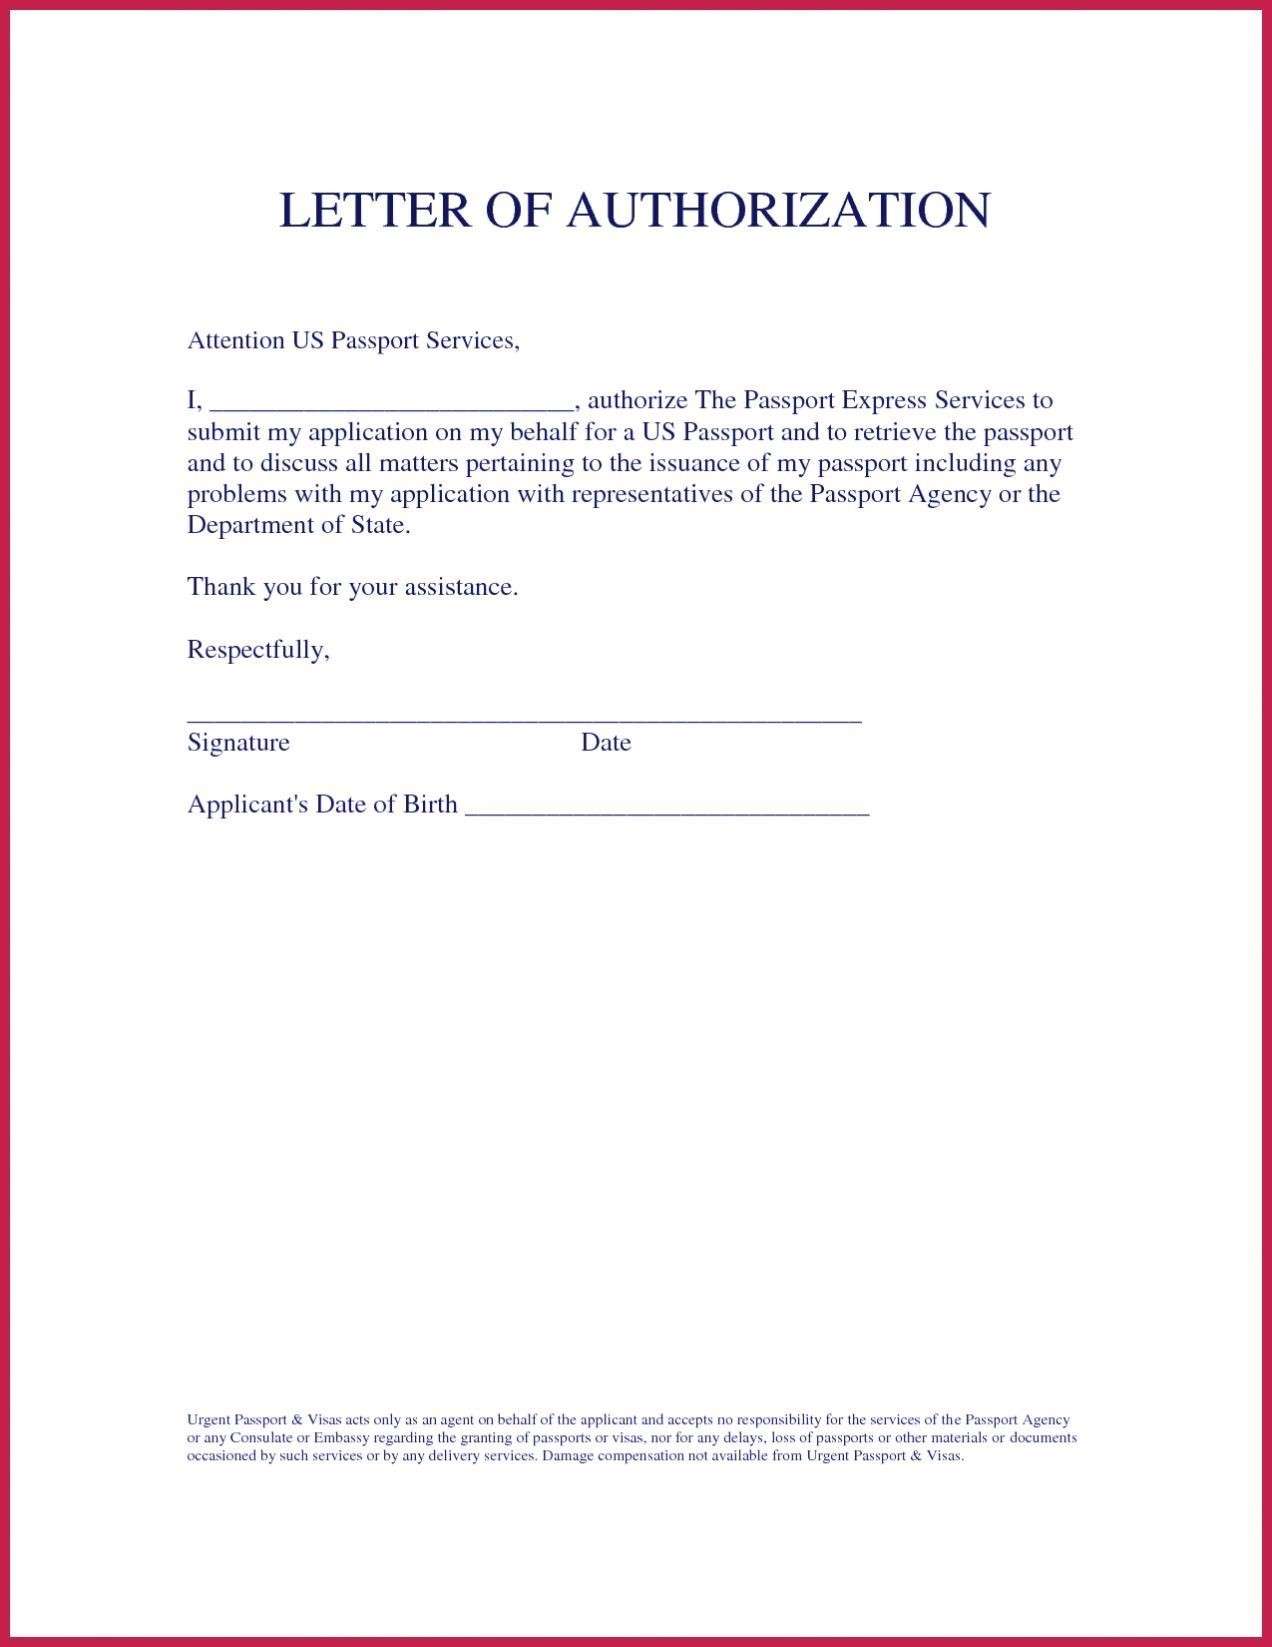 Ups Letter Of Authorization Template 7369